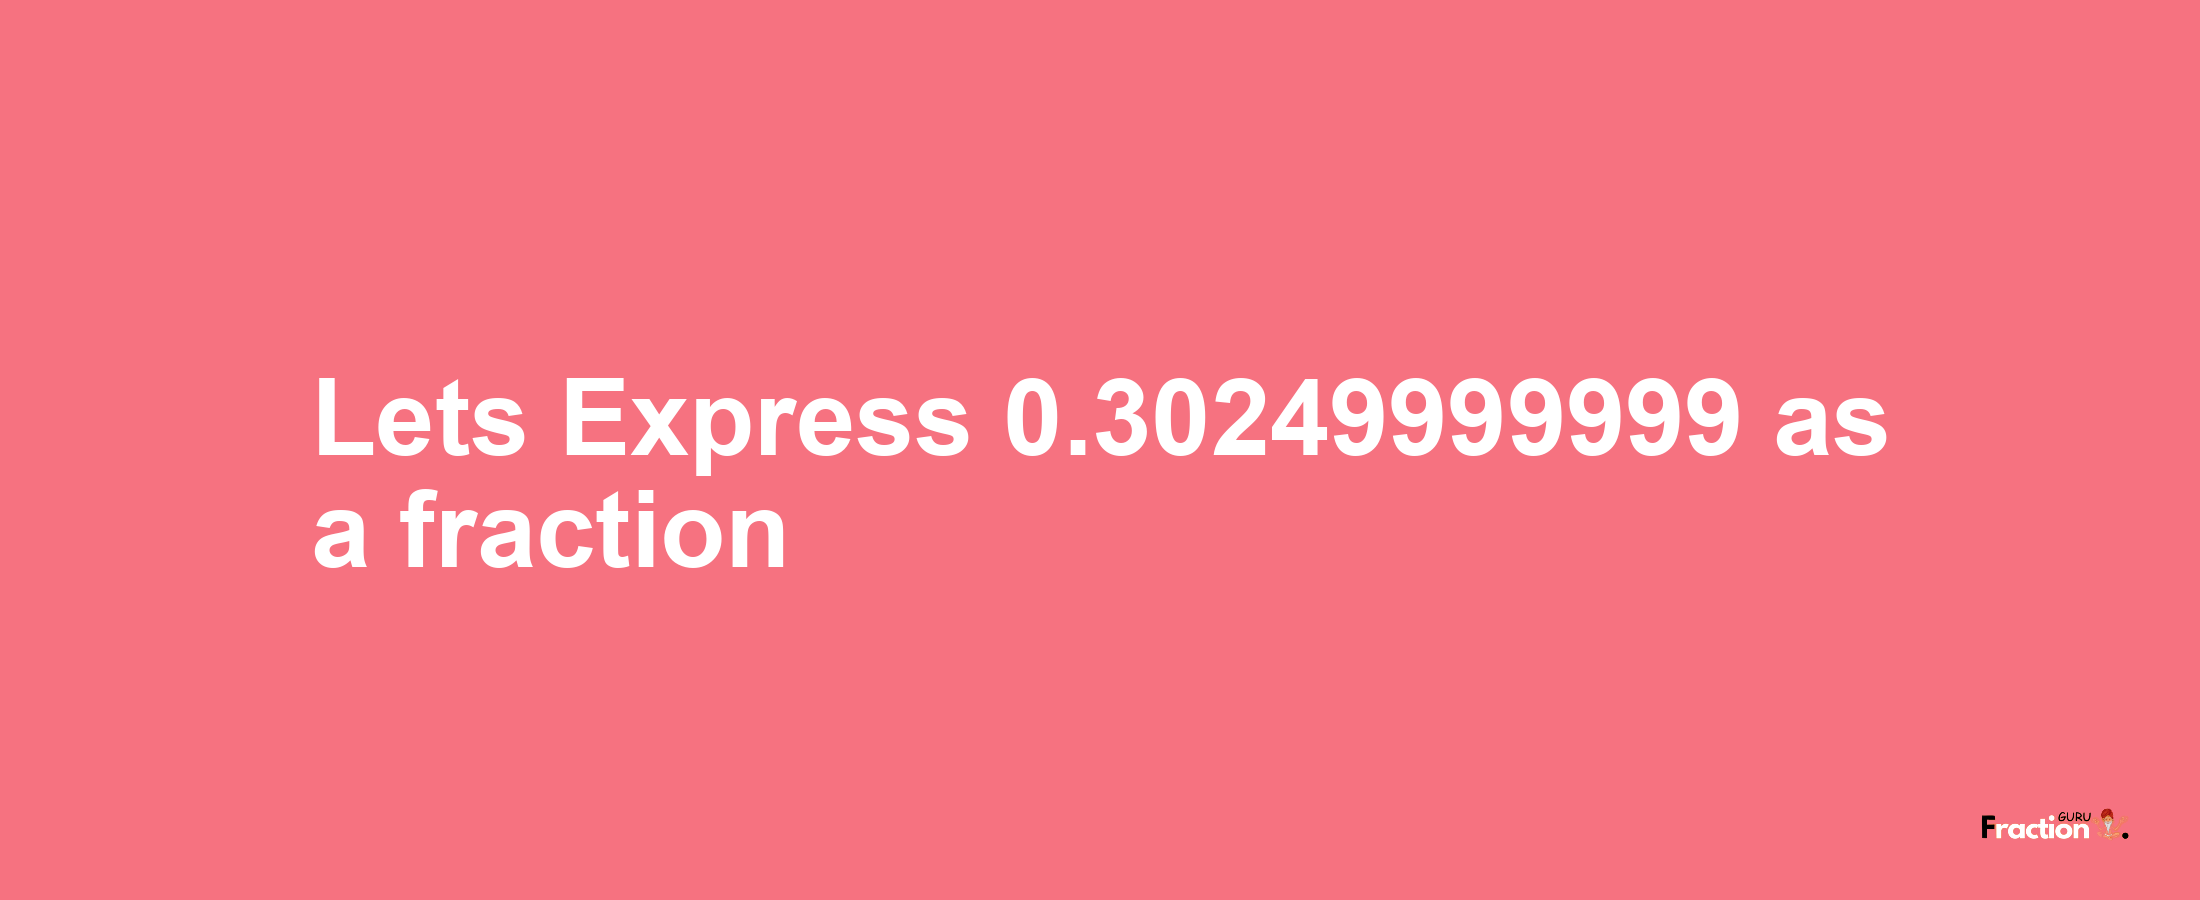 Lets Express 0.30249999999 as afraction